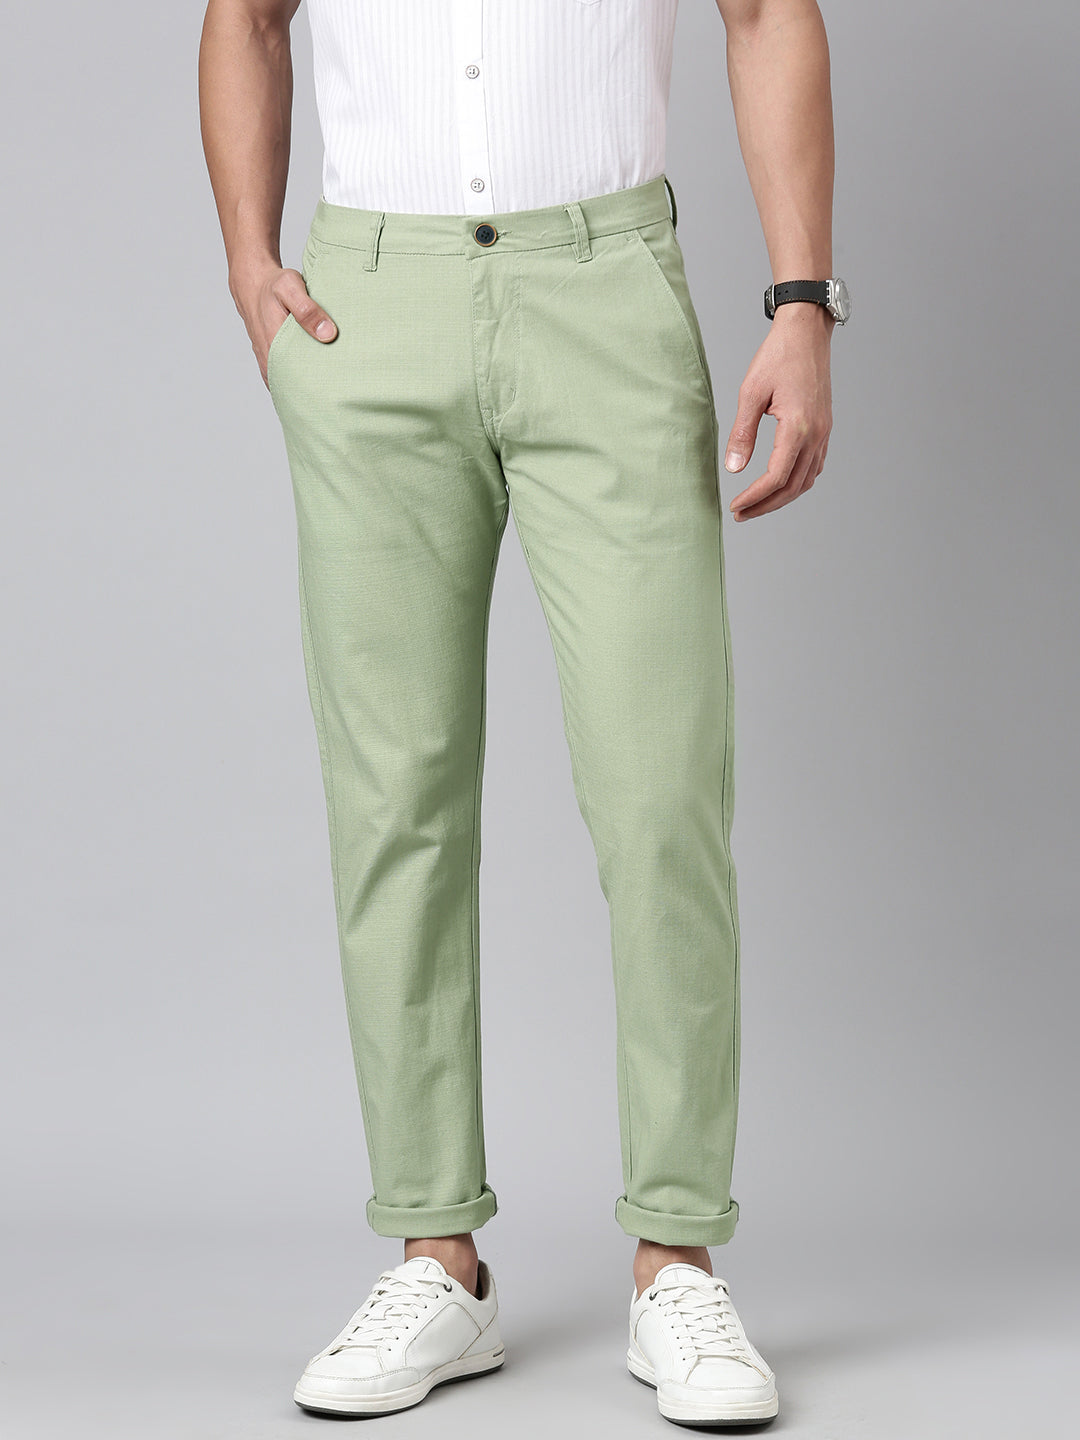 Majestic Man Regular Fit Solid Casual Trouser - Sage Green